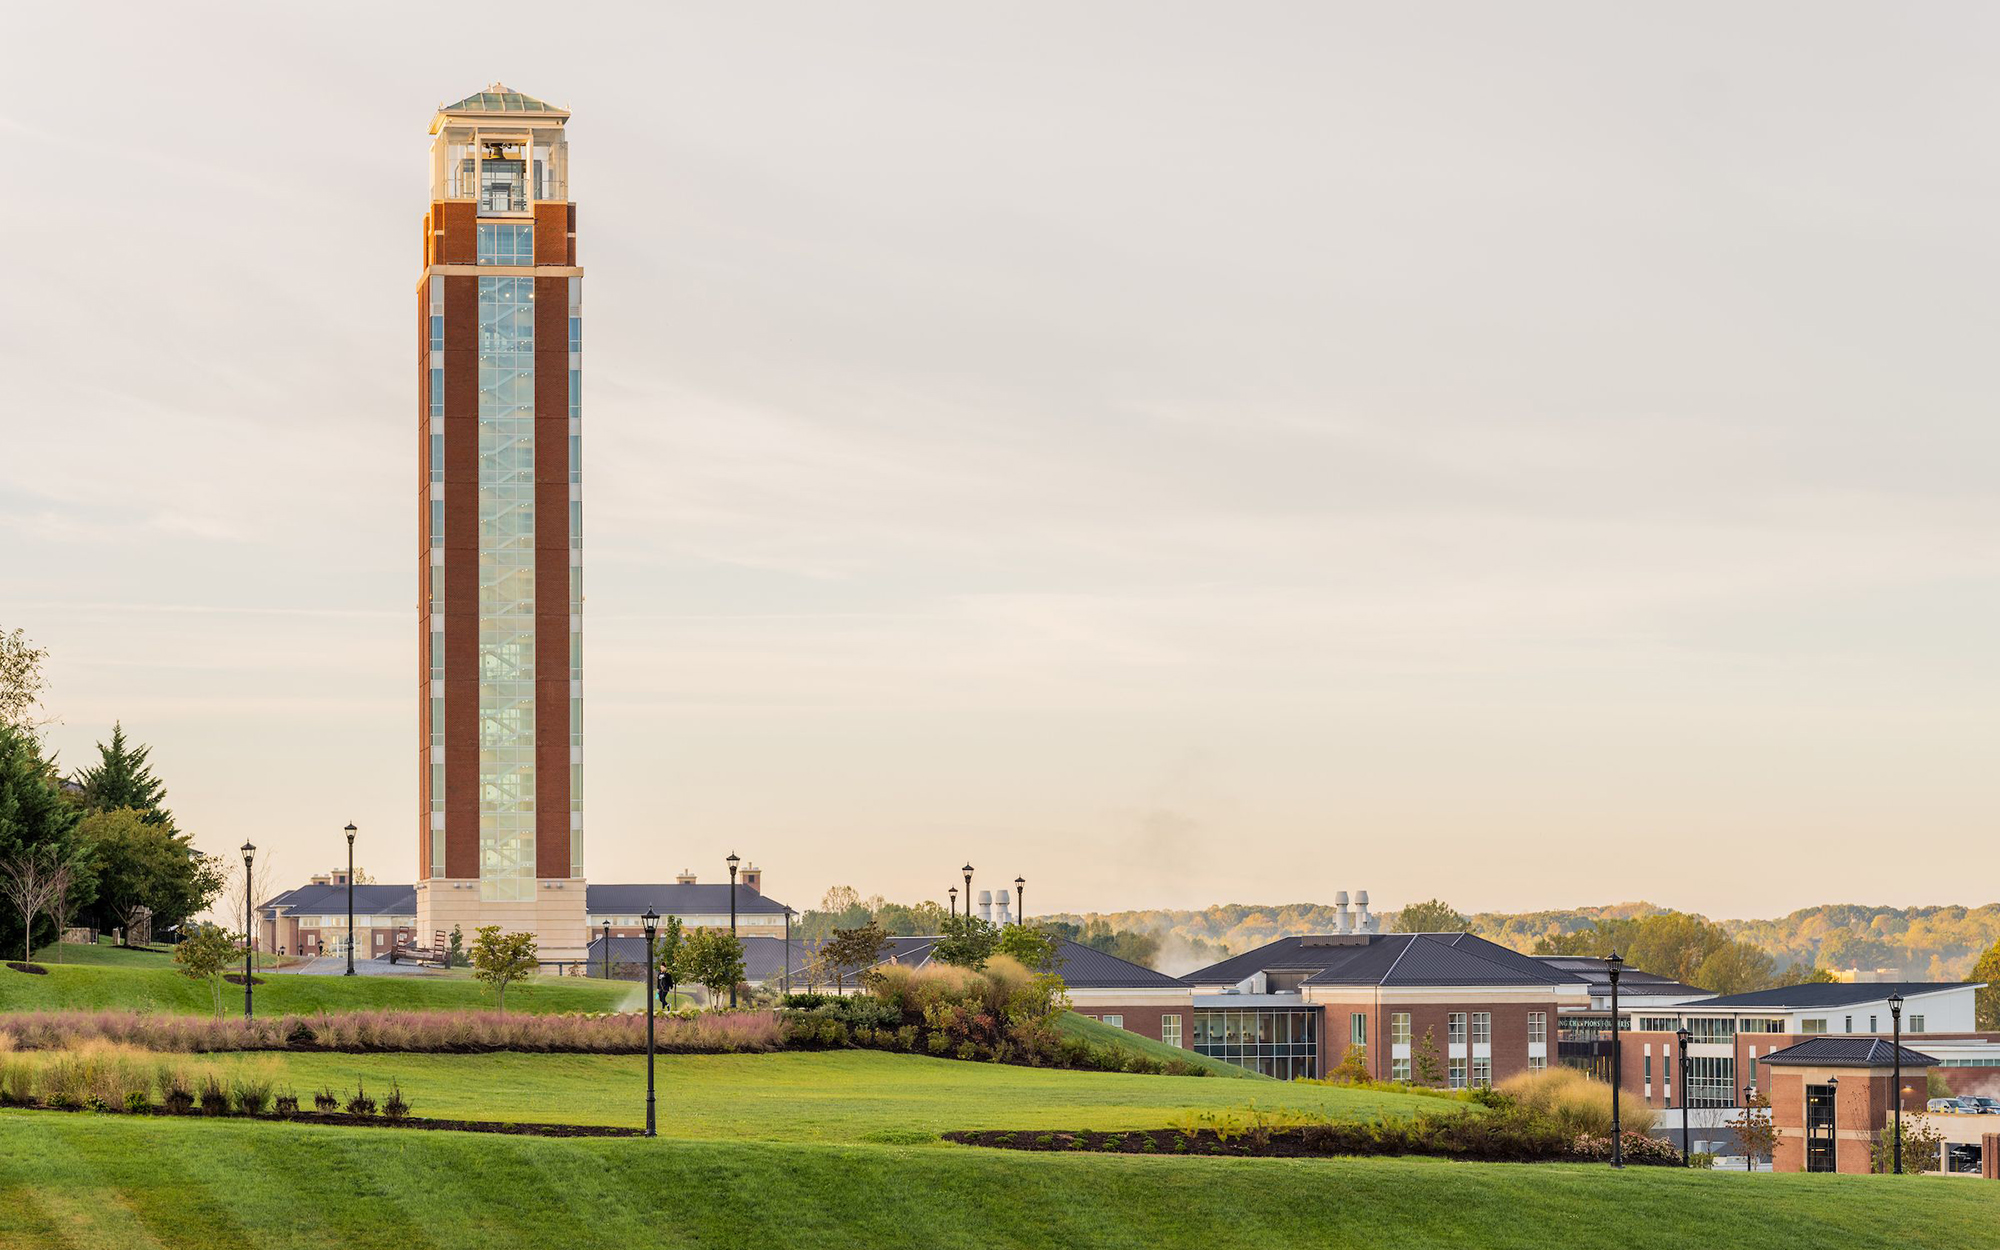 The National Association of Christian Lawmakers held its annual policy conference in June at Liberty University in Lynchburg, Va. The school was founded by the late fundamentalist preacher Jerry Falwell to train, in the school’s words, “champions for Christ.” (Photo courtesy of Liberty University)